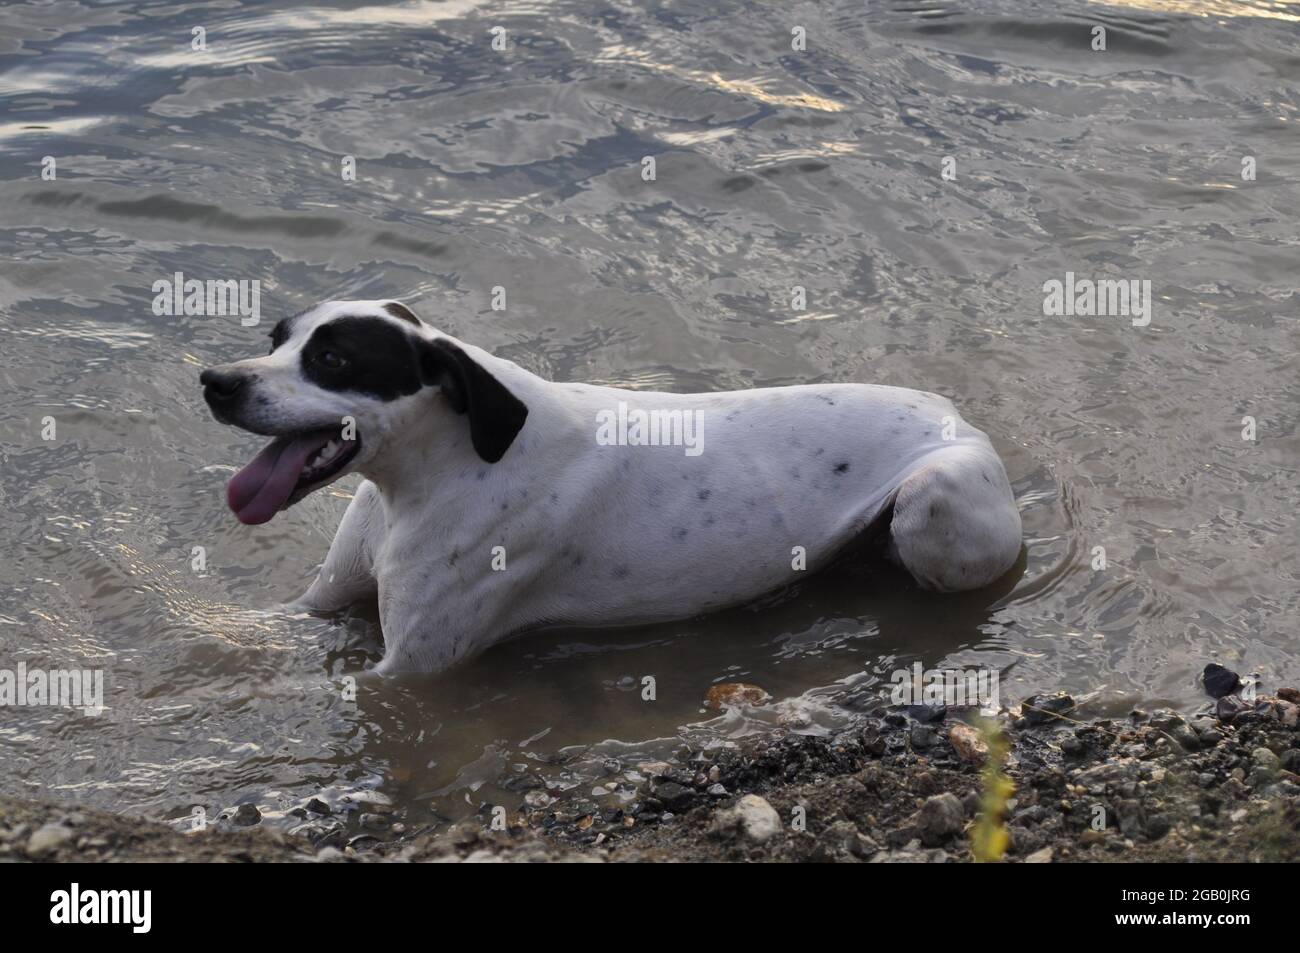 A dog cools in the cold waters of the river during the summer heat. Stock Photo